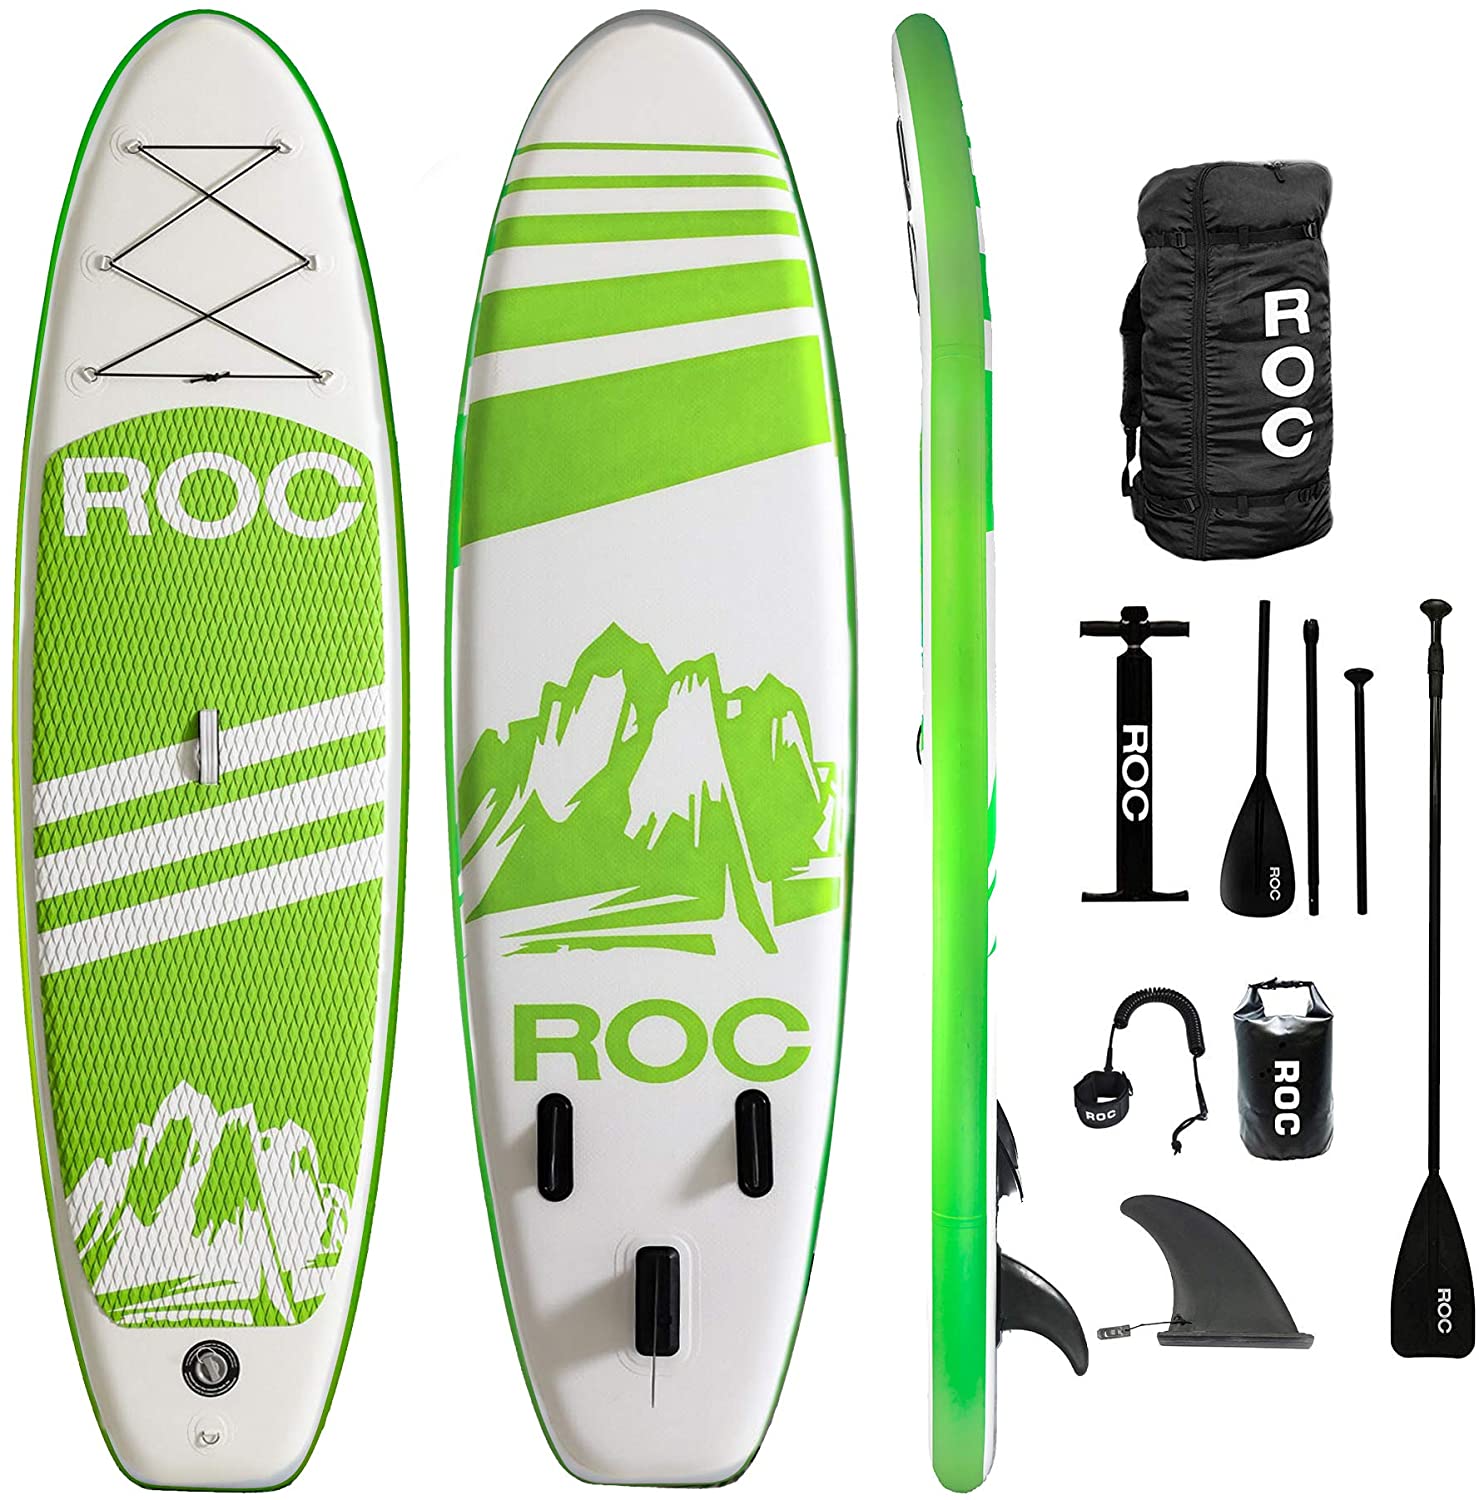 Roc inflatable Stand up paddle board